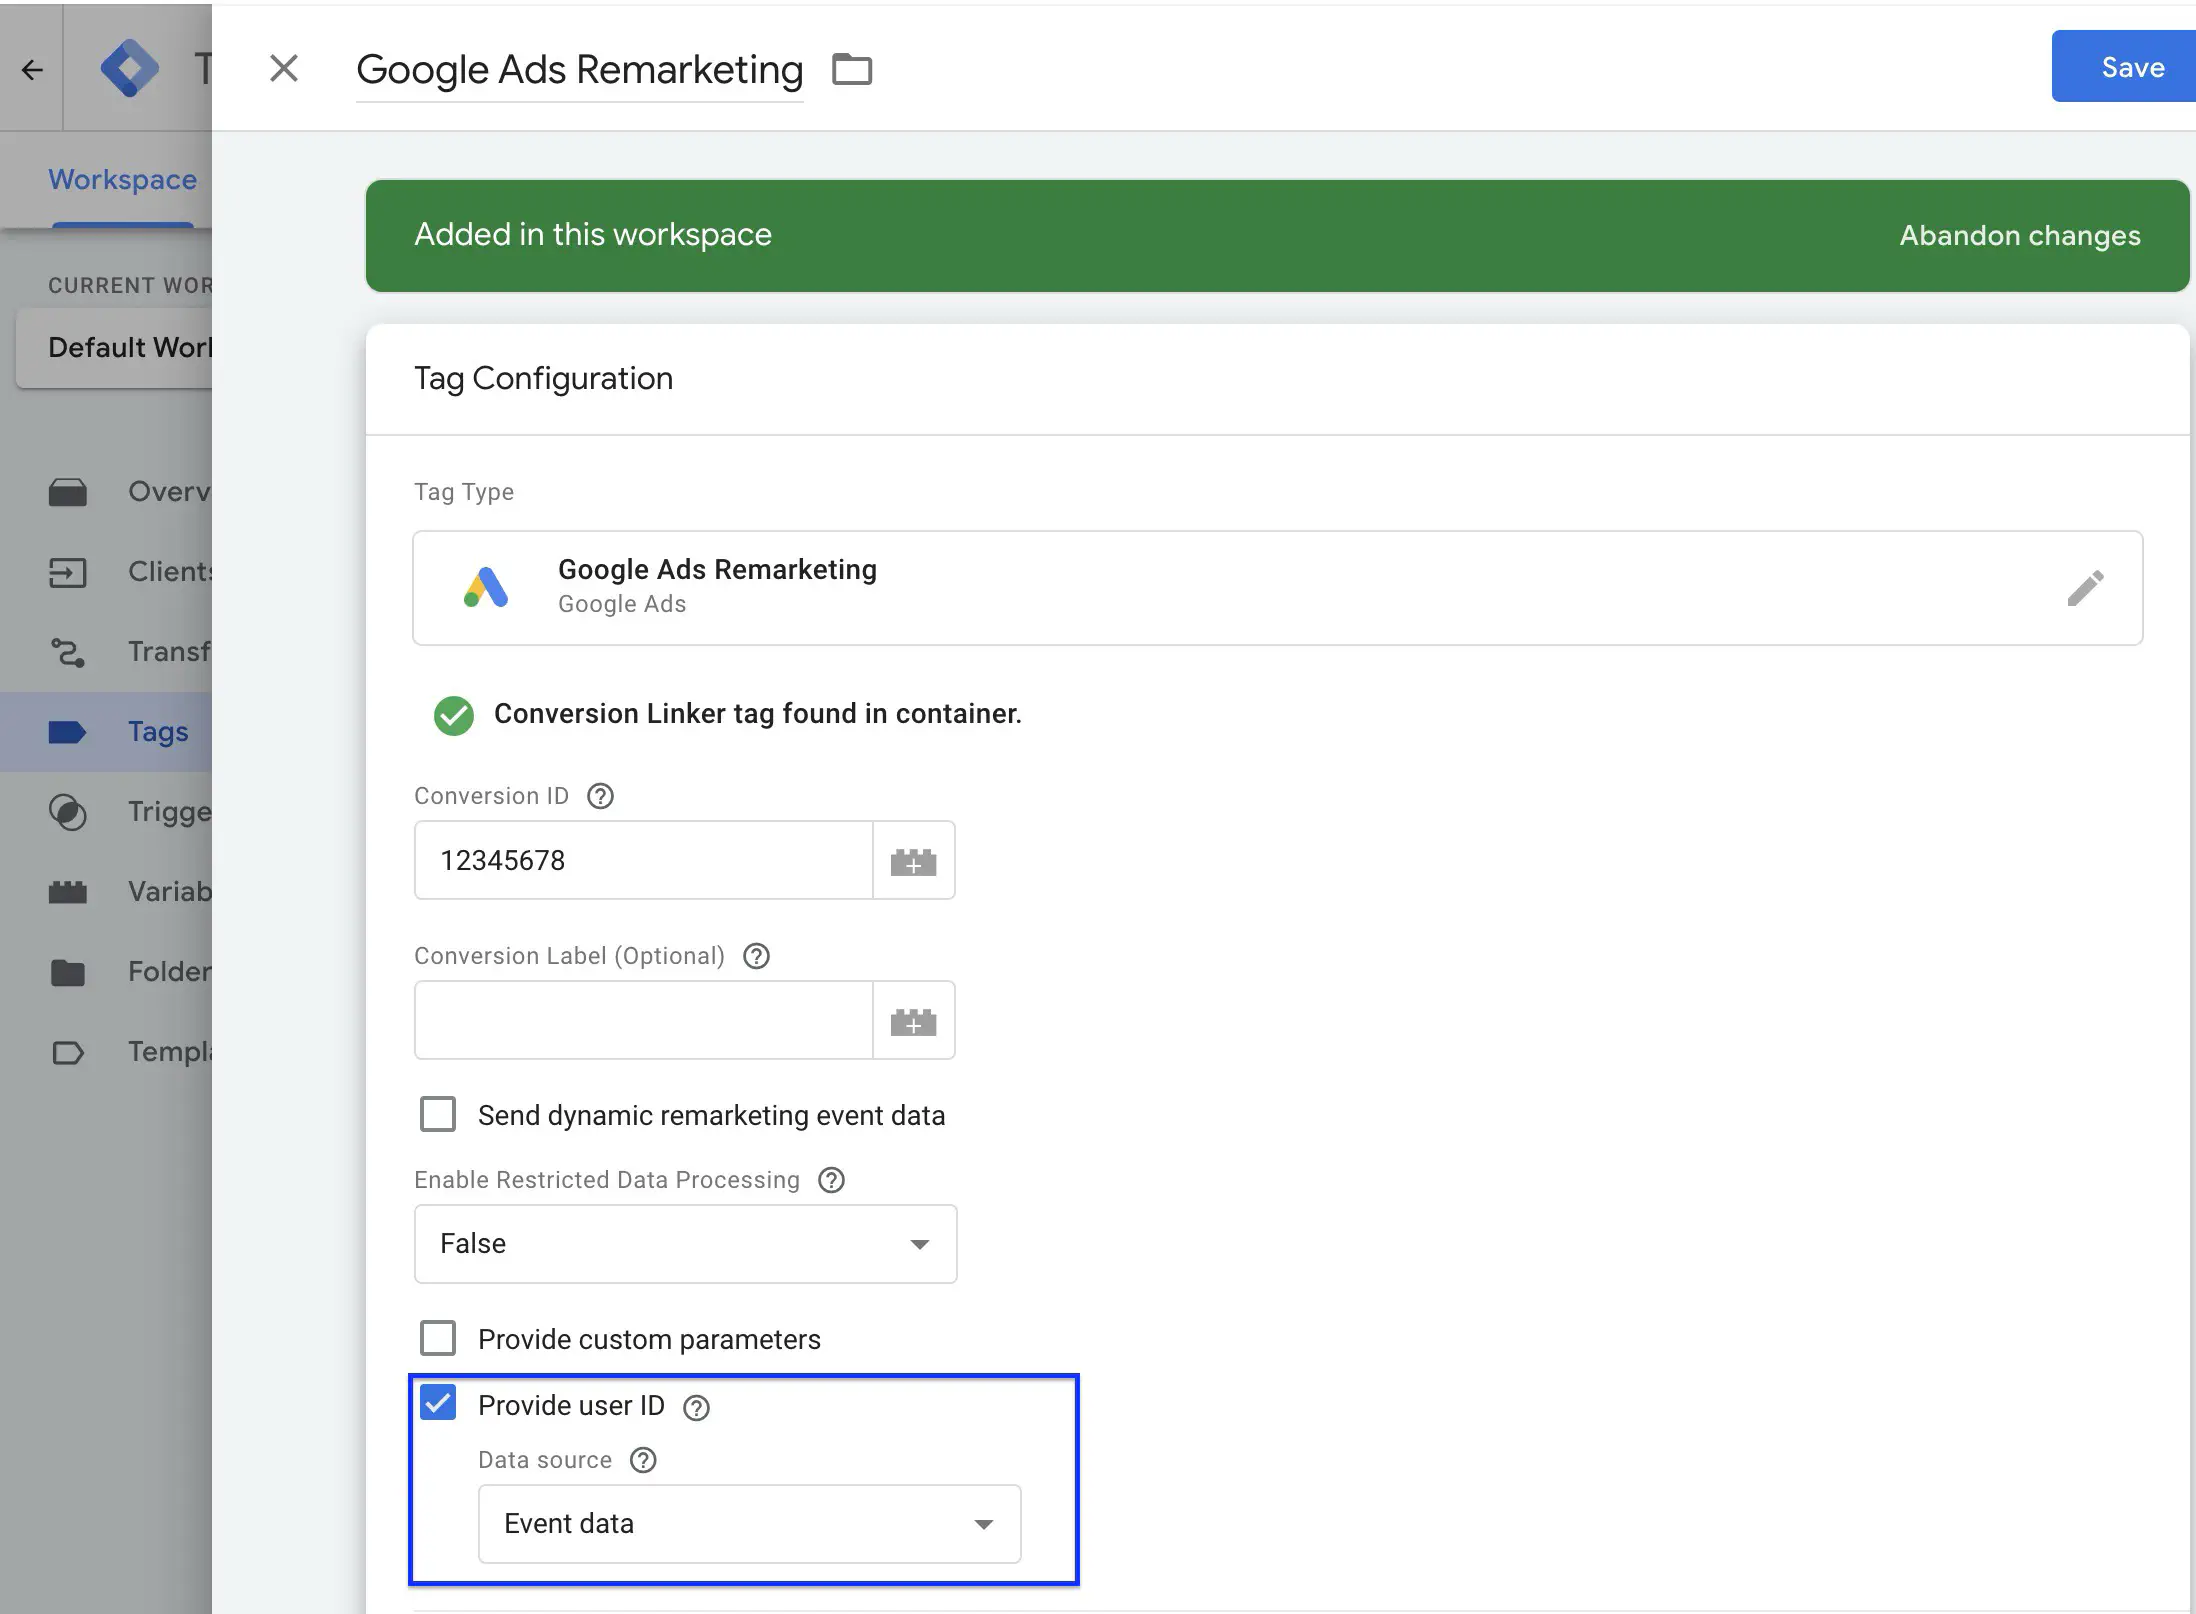 Sending User ID with Google Ads Remarketing tag